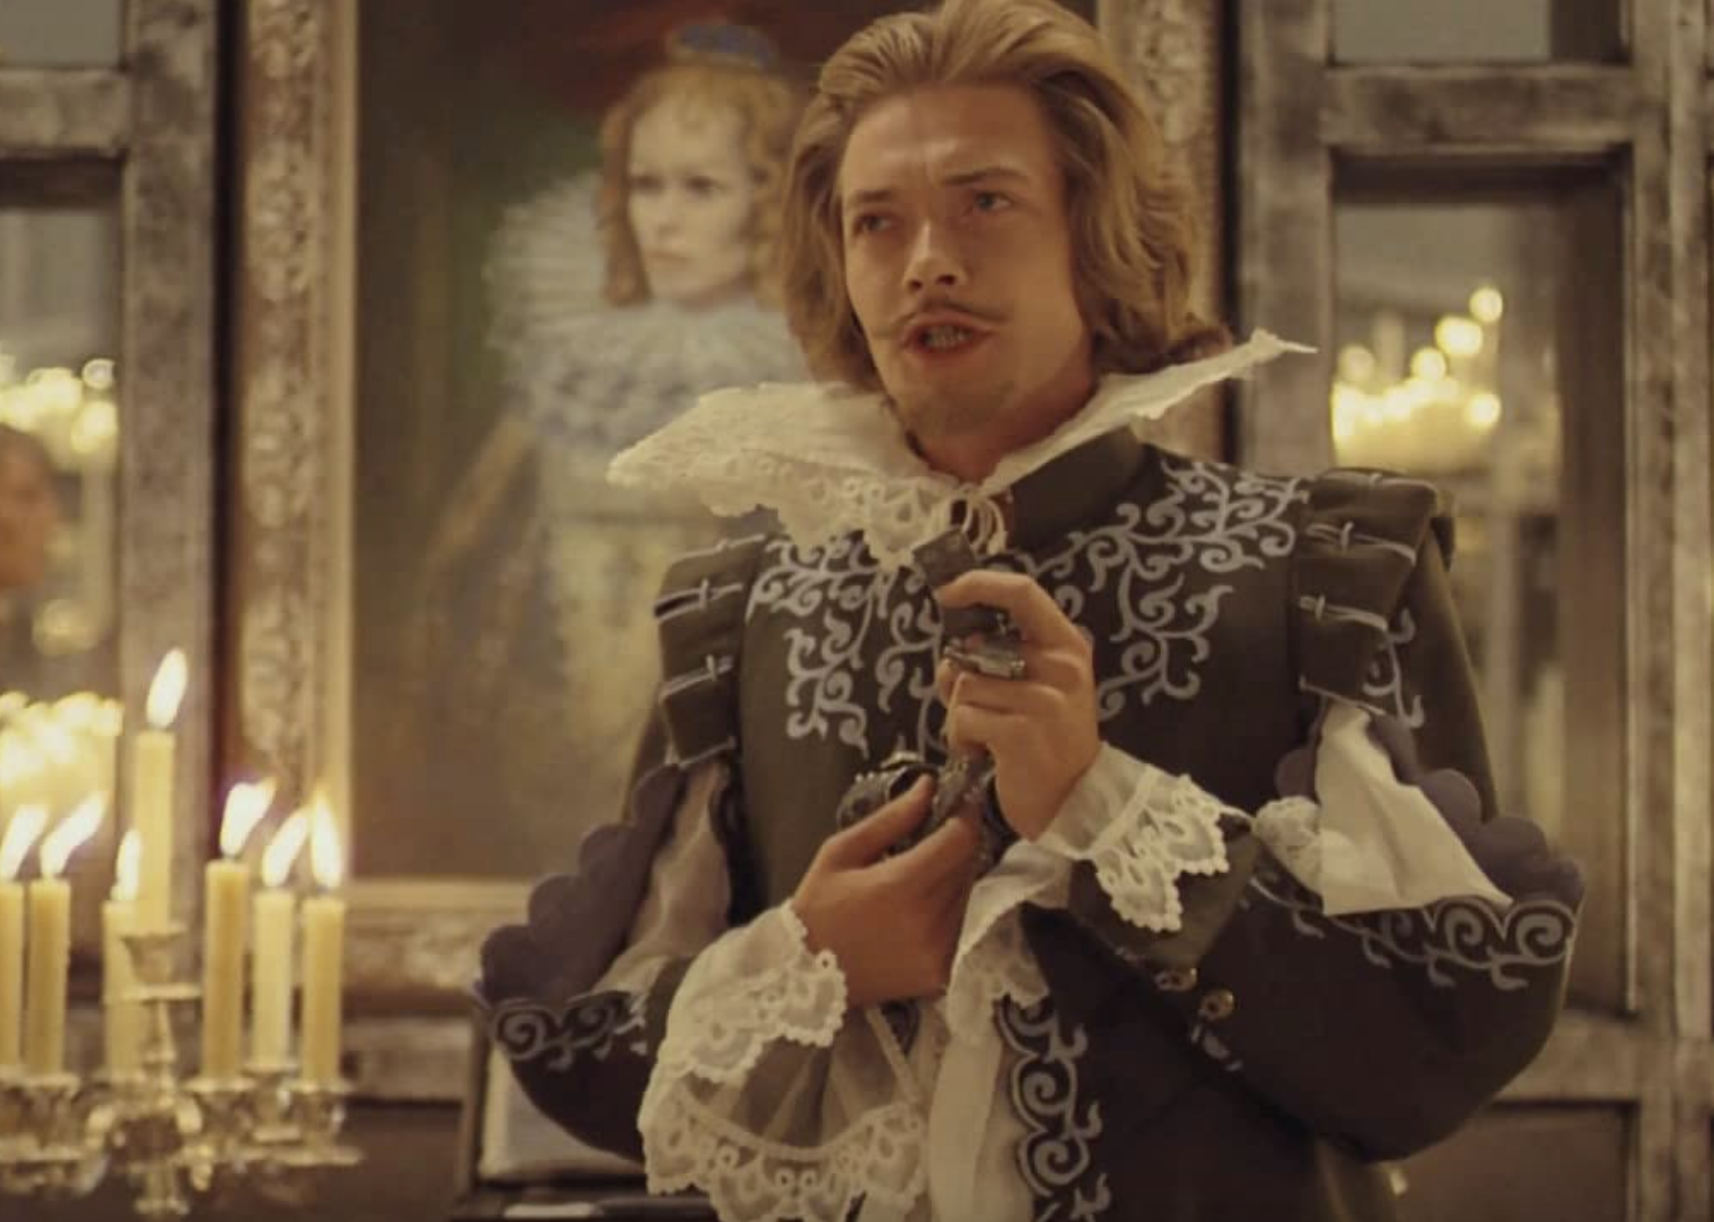 Simon Ward in a scene from "The Three Musketeers".